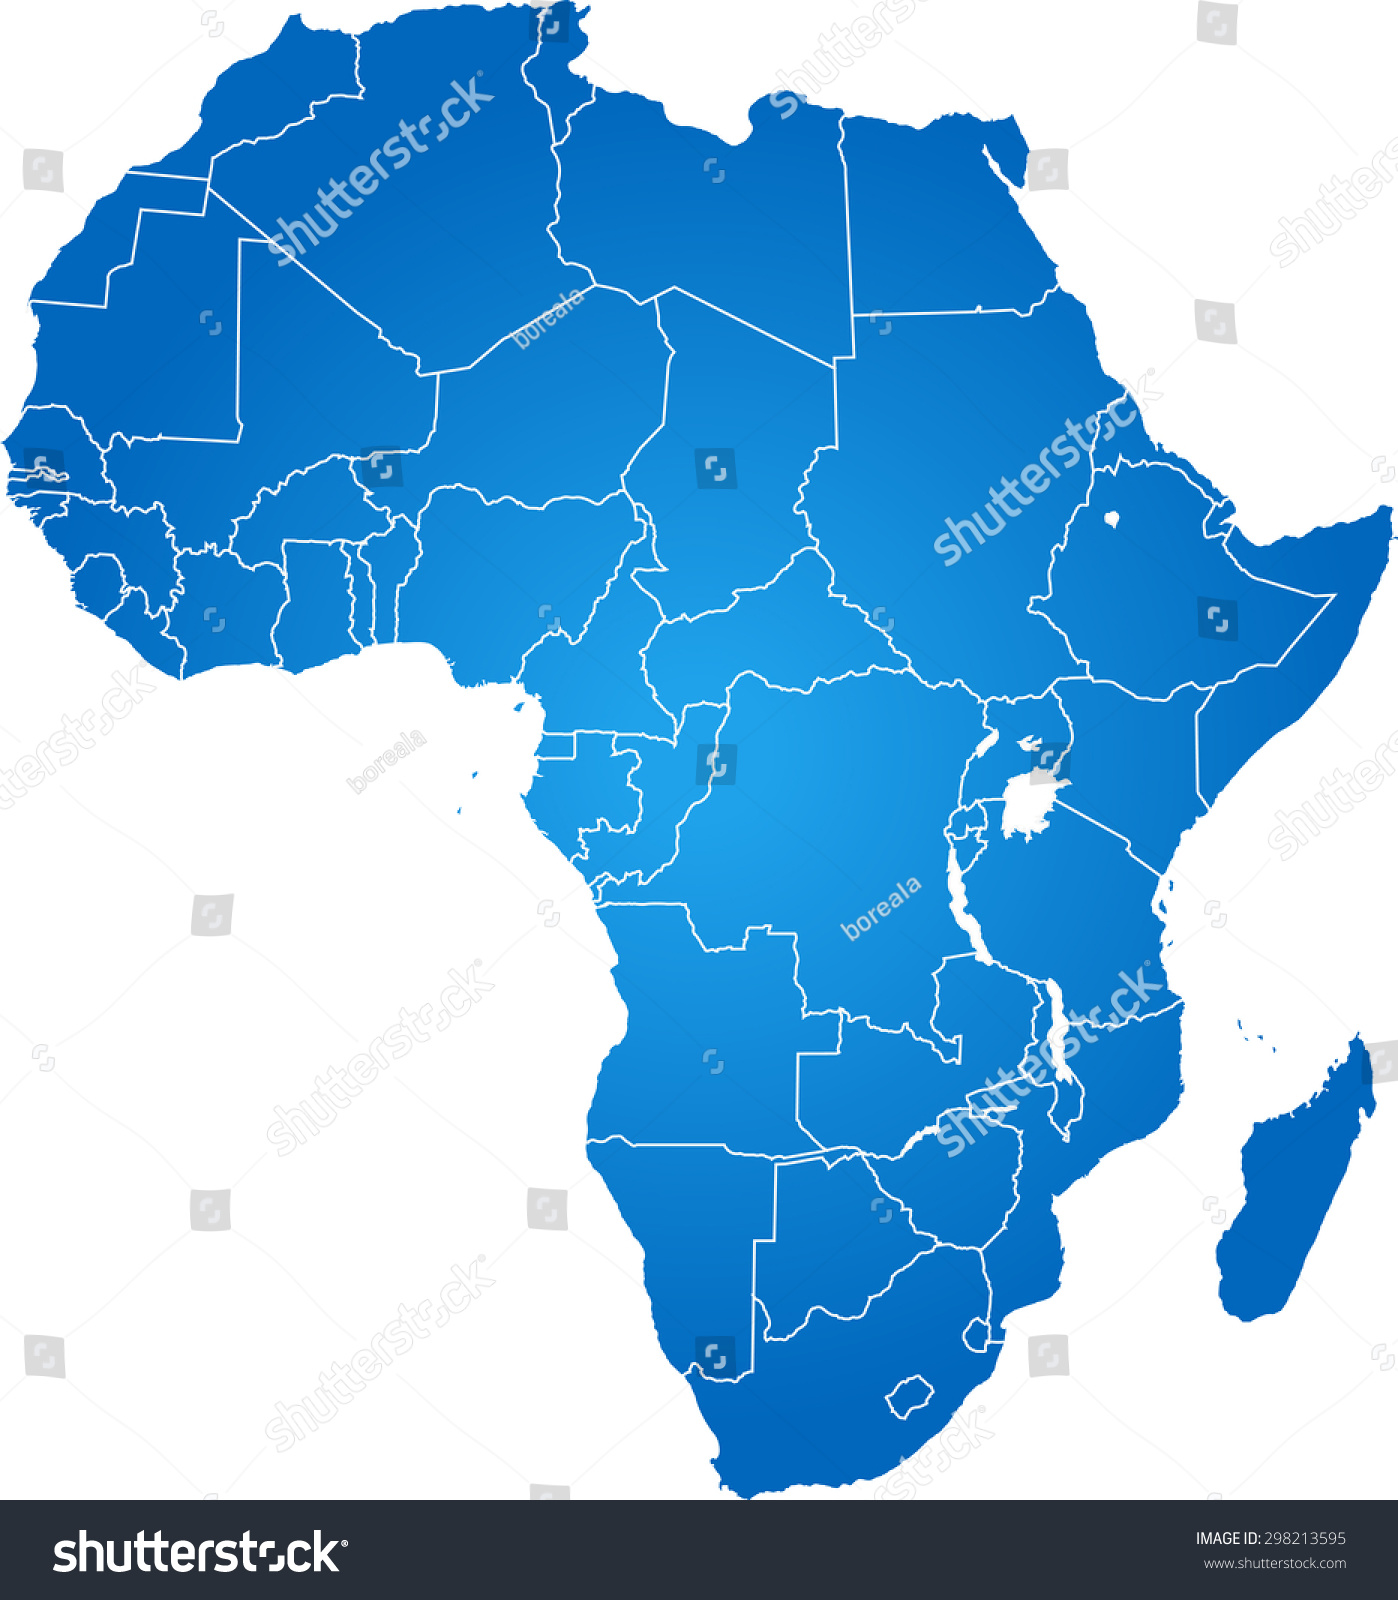 Map Of Africa Royalty Free Stock Vector 298213595 6411